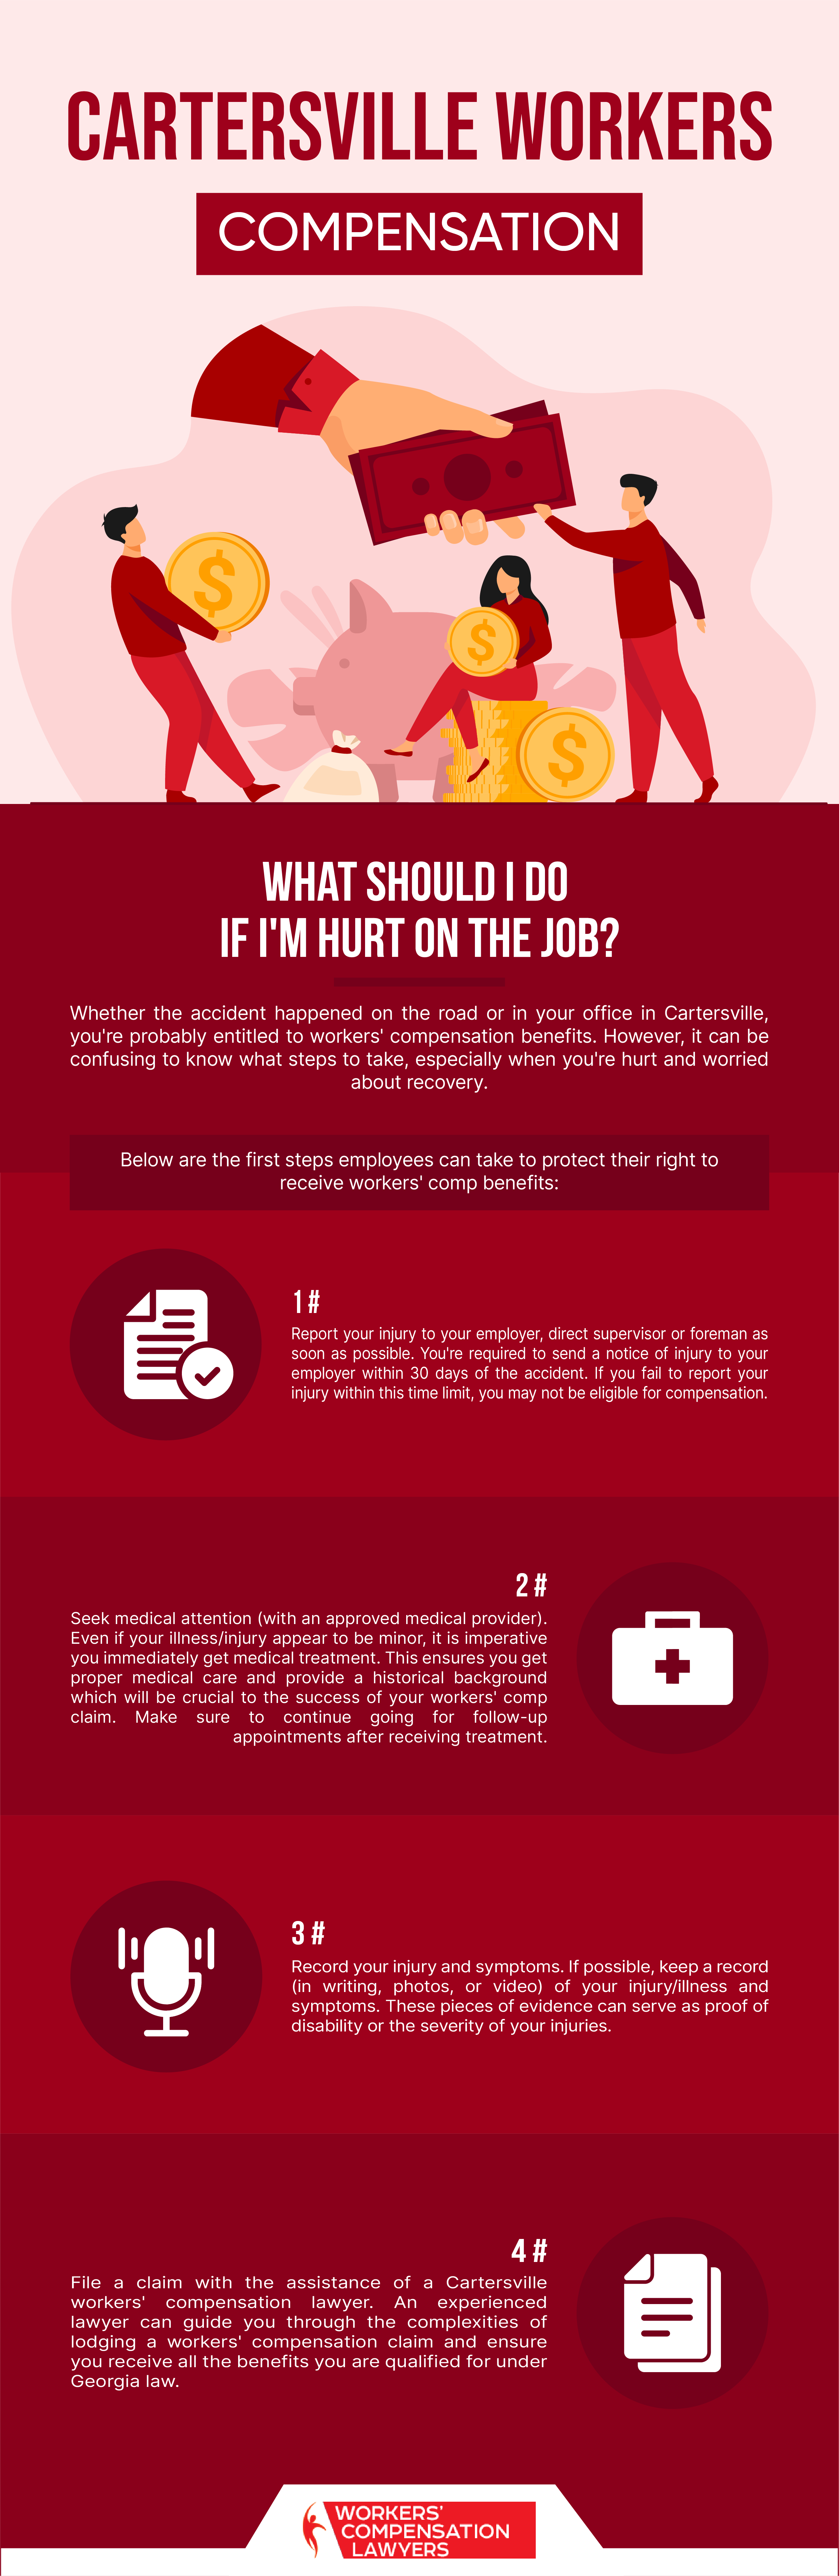 Cartersville Workers Compensation Infographic